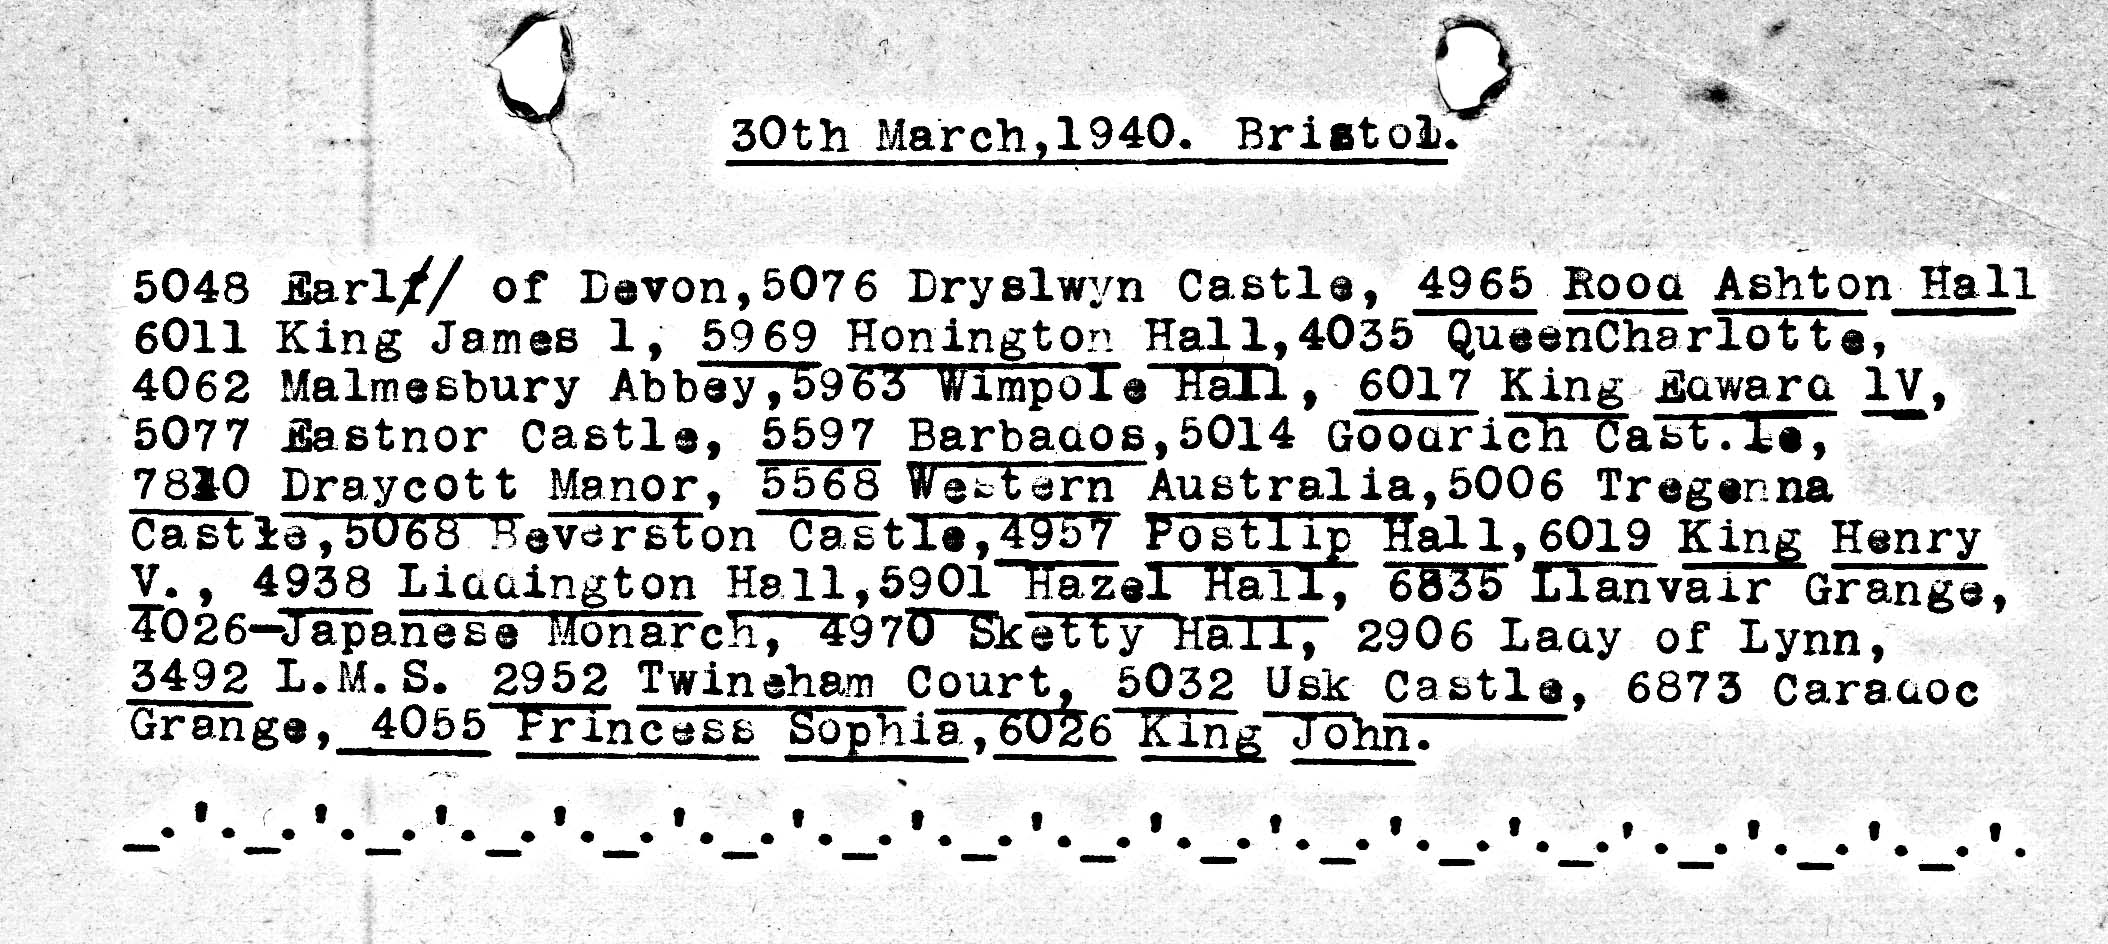 30th March 1940 - Observations at Bristol.